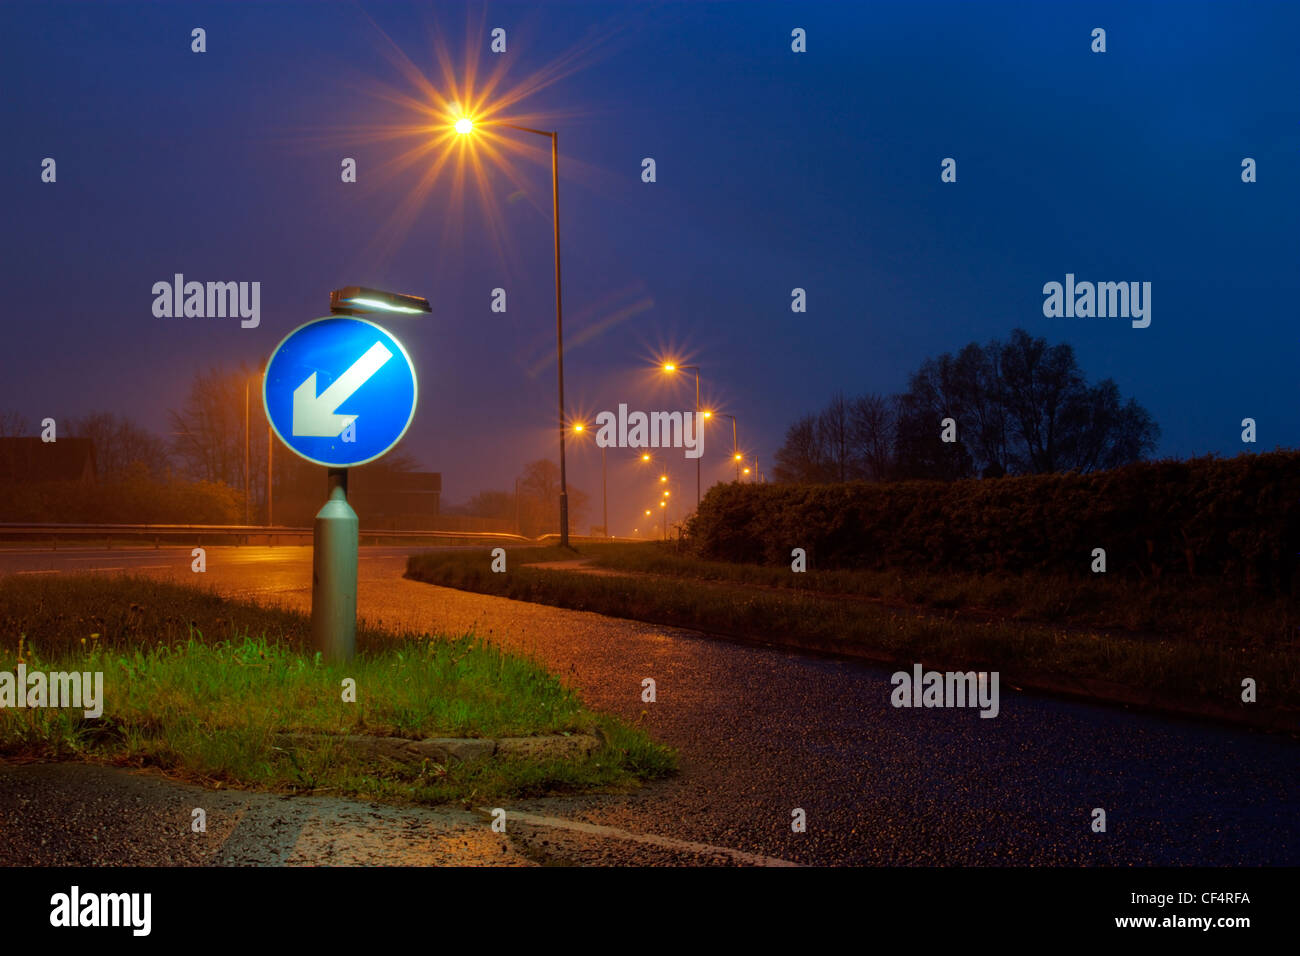 A road sign indicating to keep left, lit up at dusk. Stock Photo